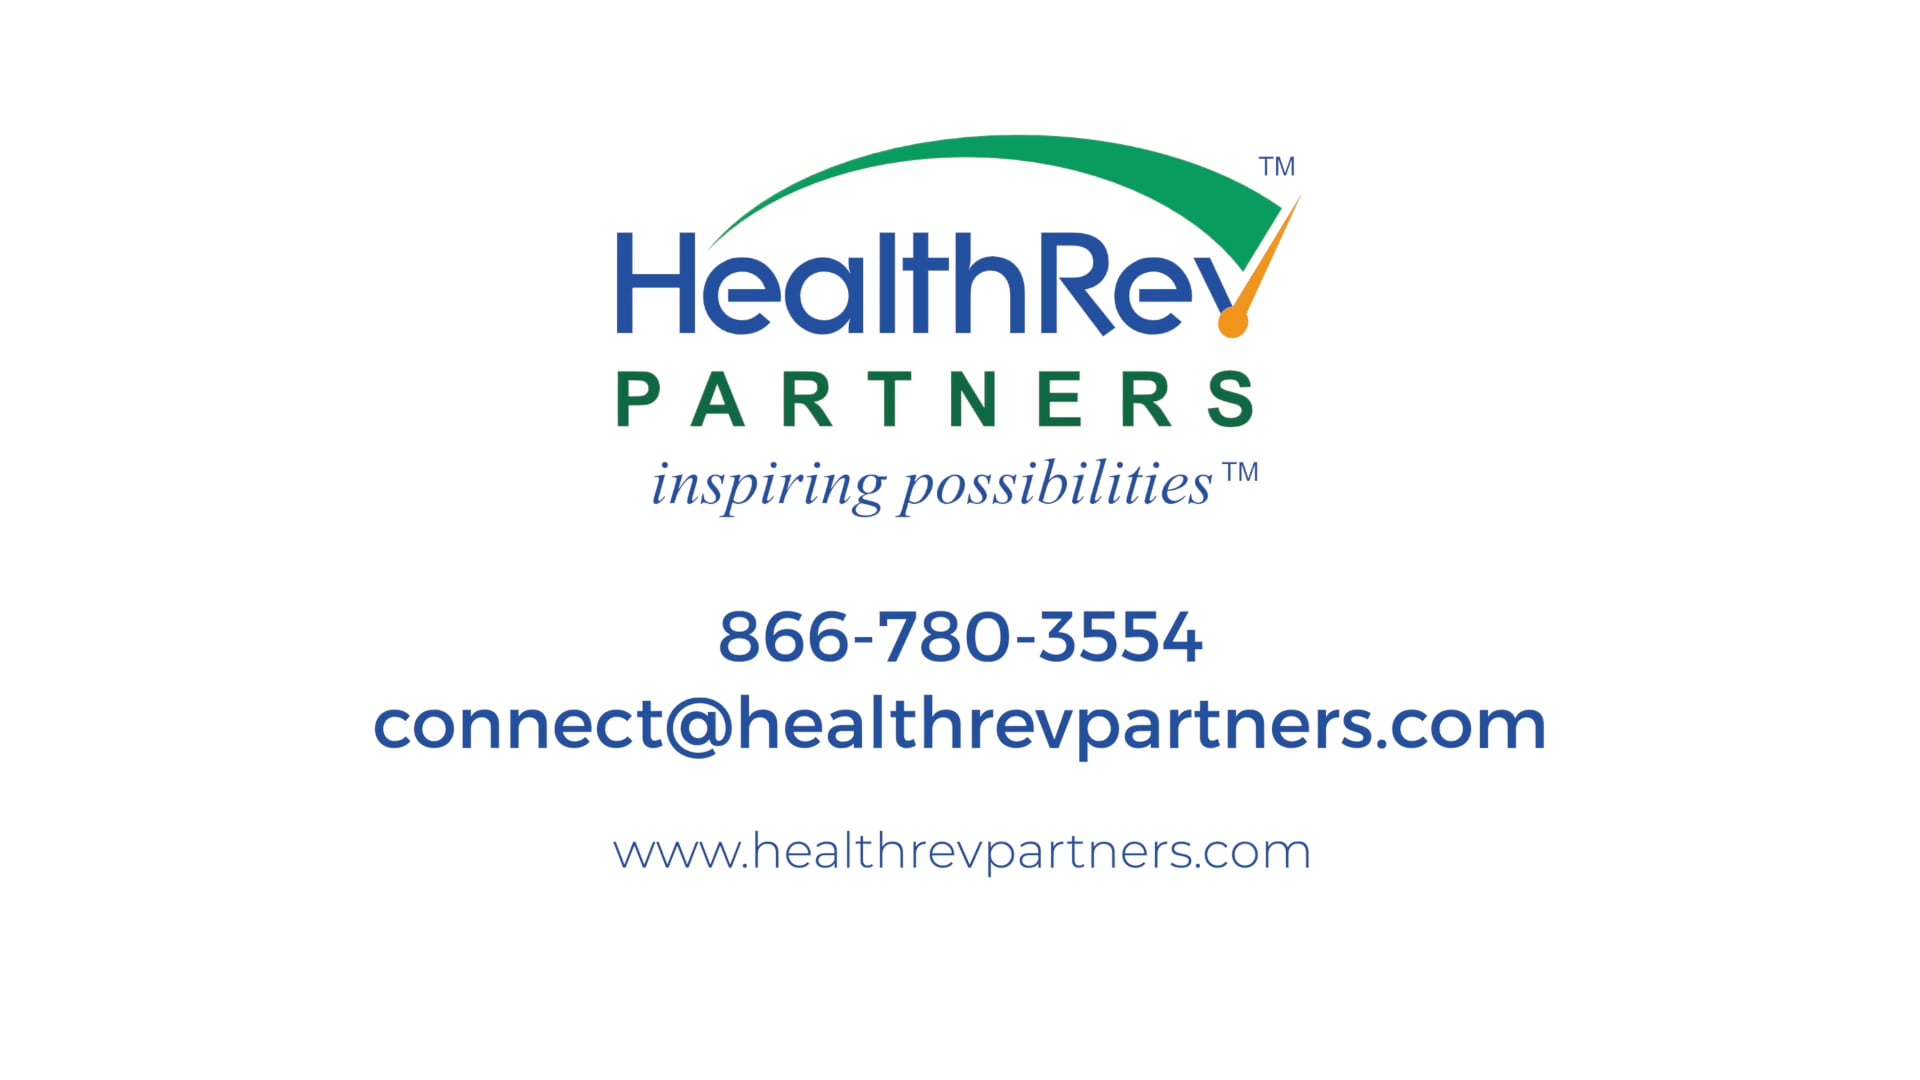 HealthRev Partners: About Us